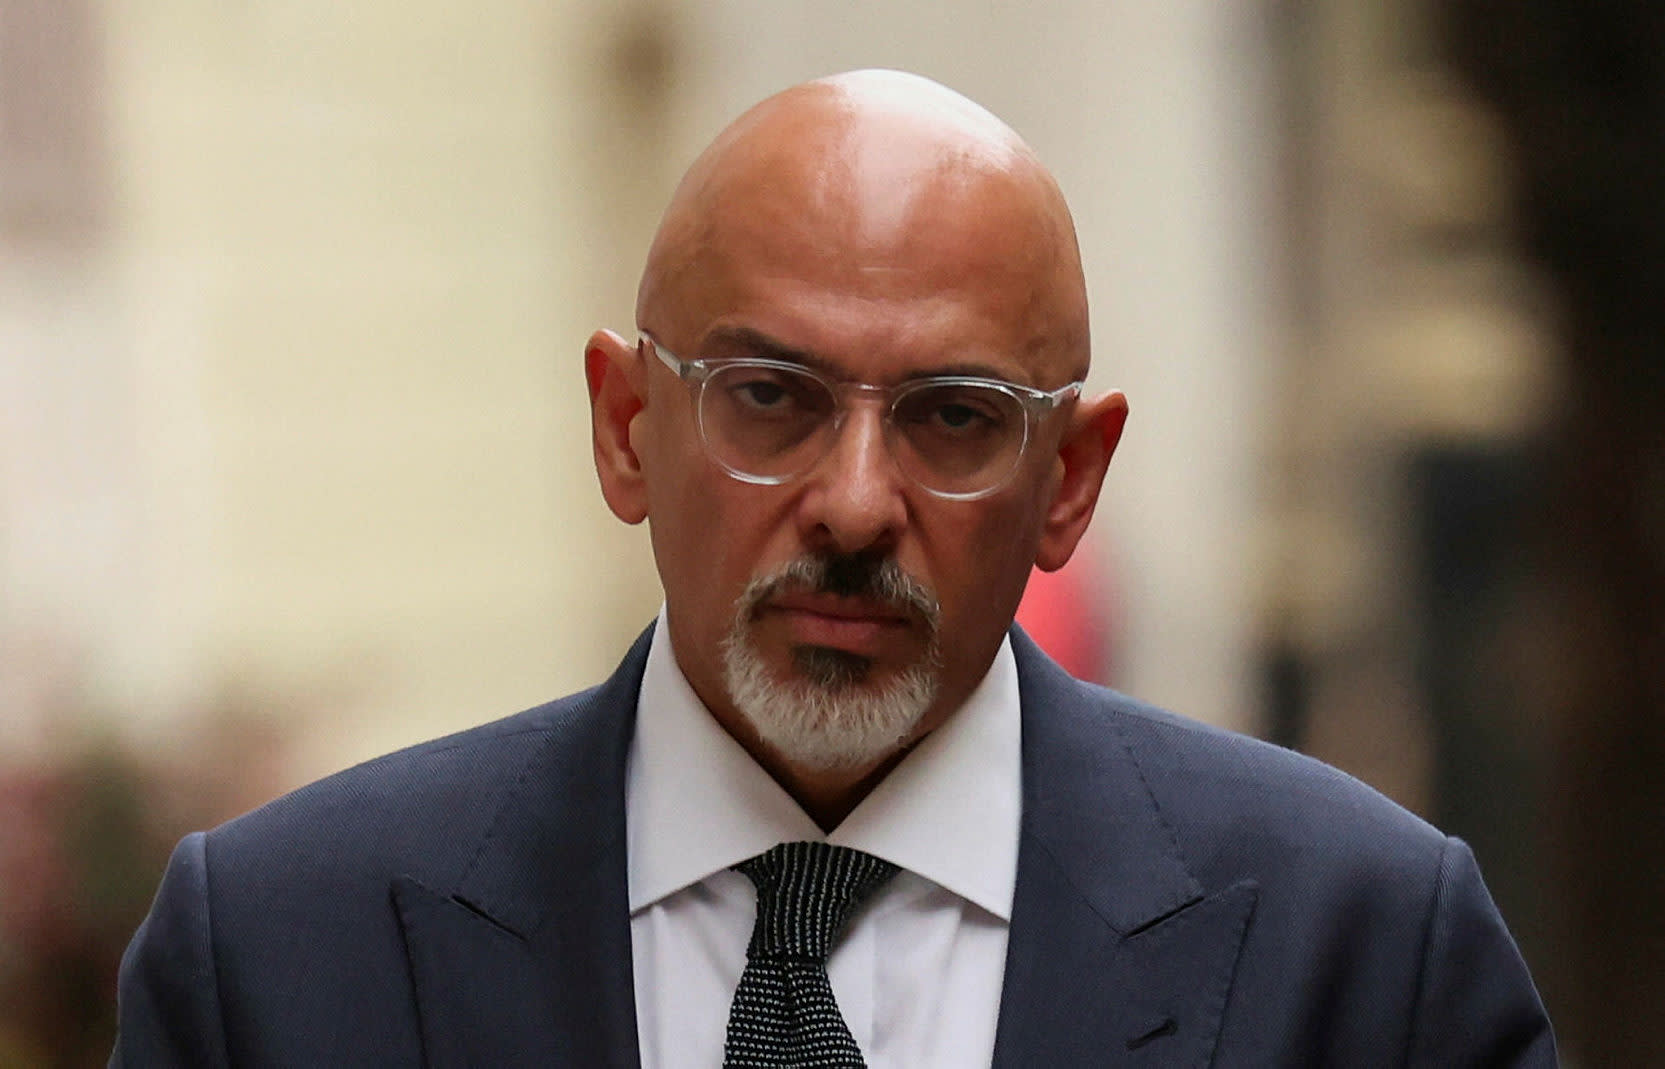 Nadhim Zahawi appointed chancellor after Sunak resigns